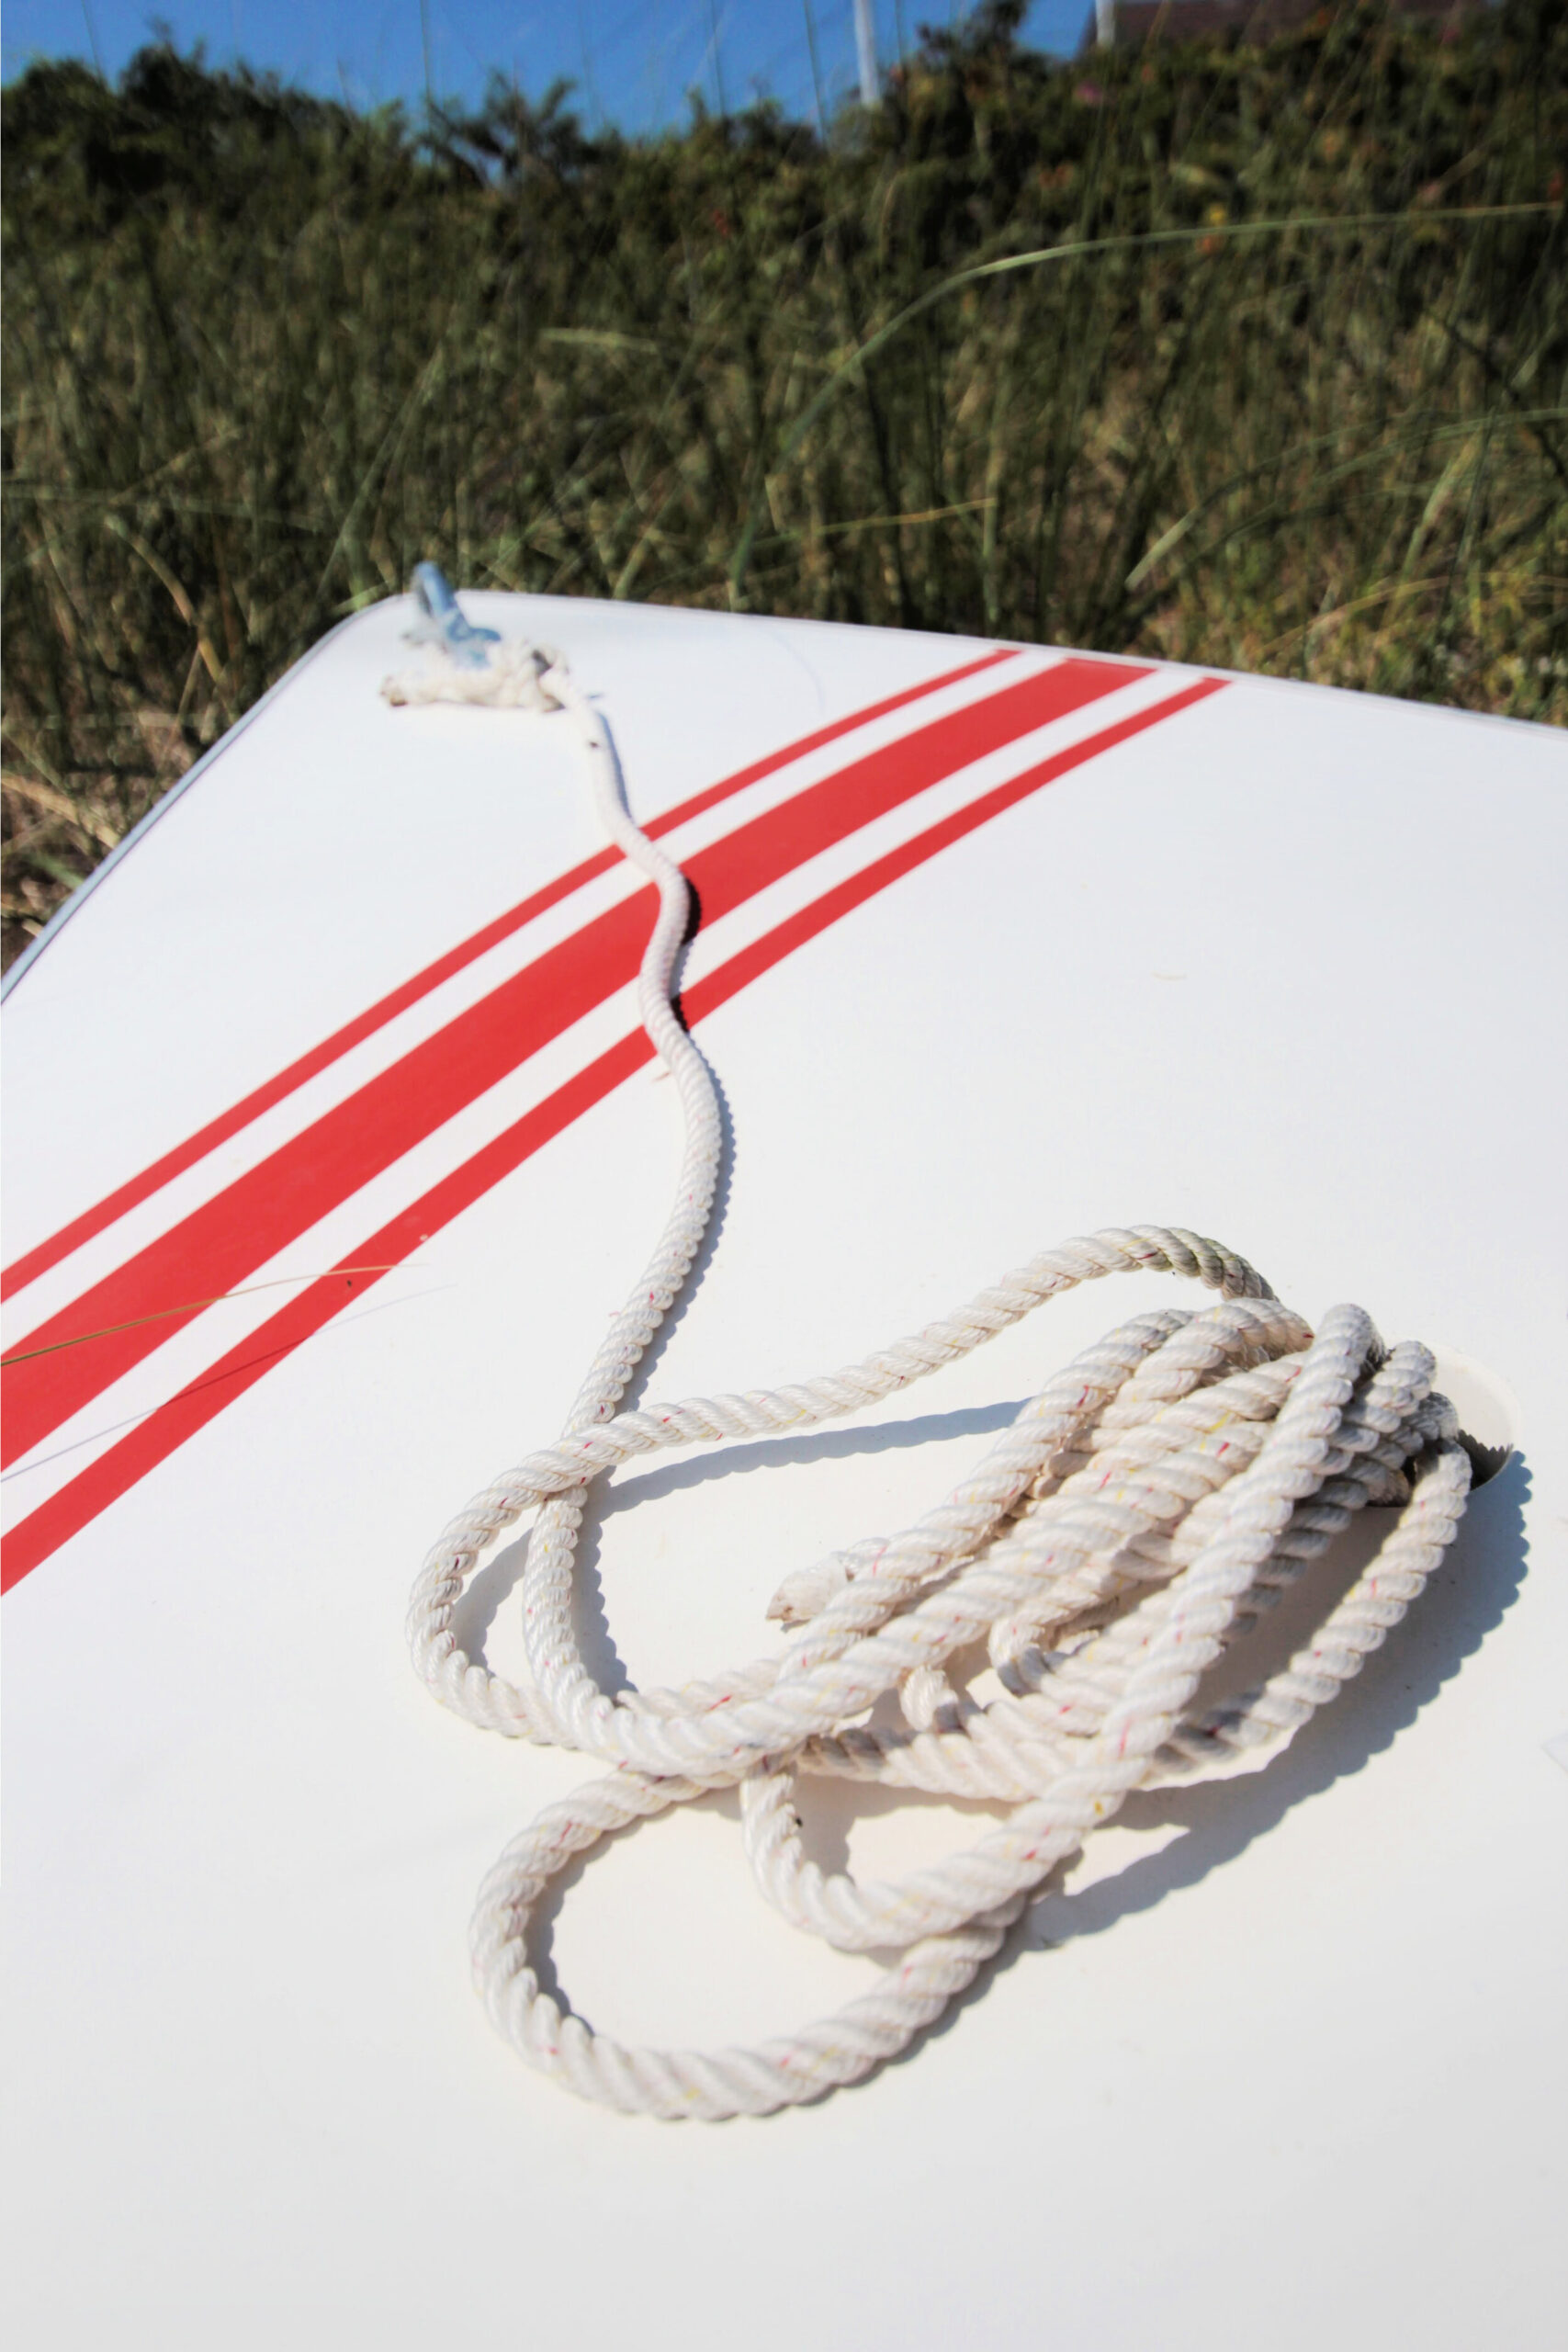 rockport-mass-loblolly-cove-boat-rope.jpg